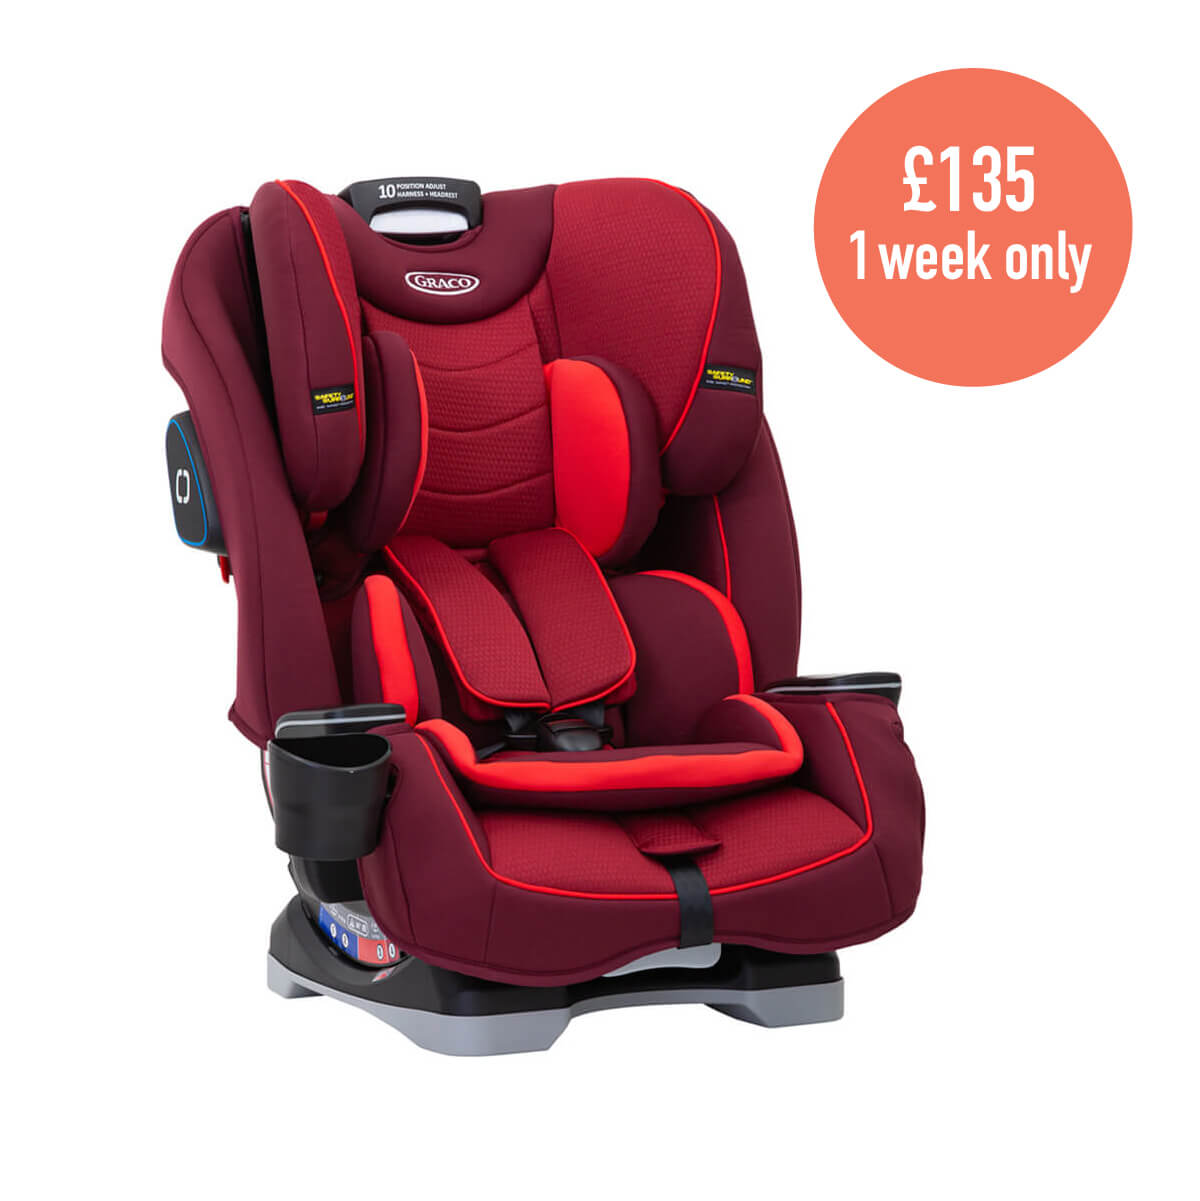 Three quarter image of Graco SlimFit 3-in-1 car seat Chili fashion on white background with text that says £135, 1 week only. 